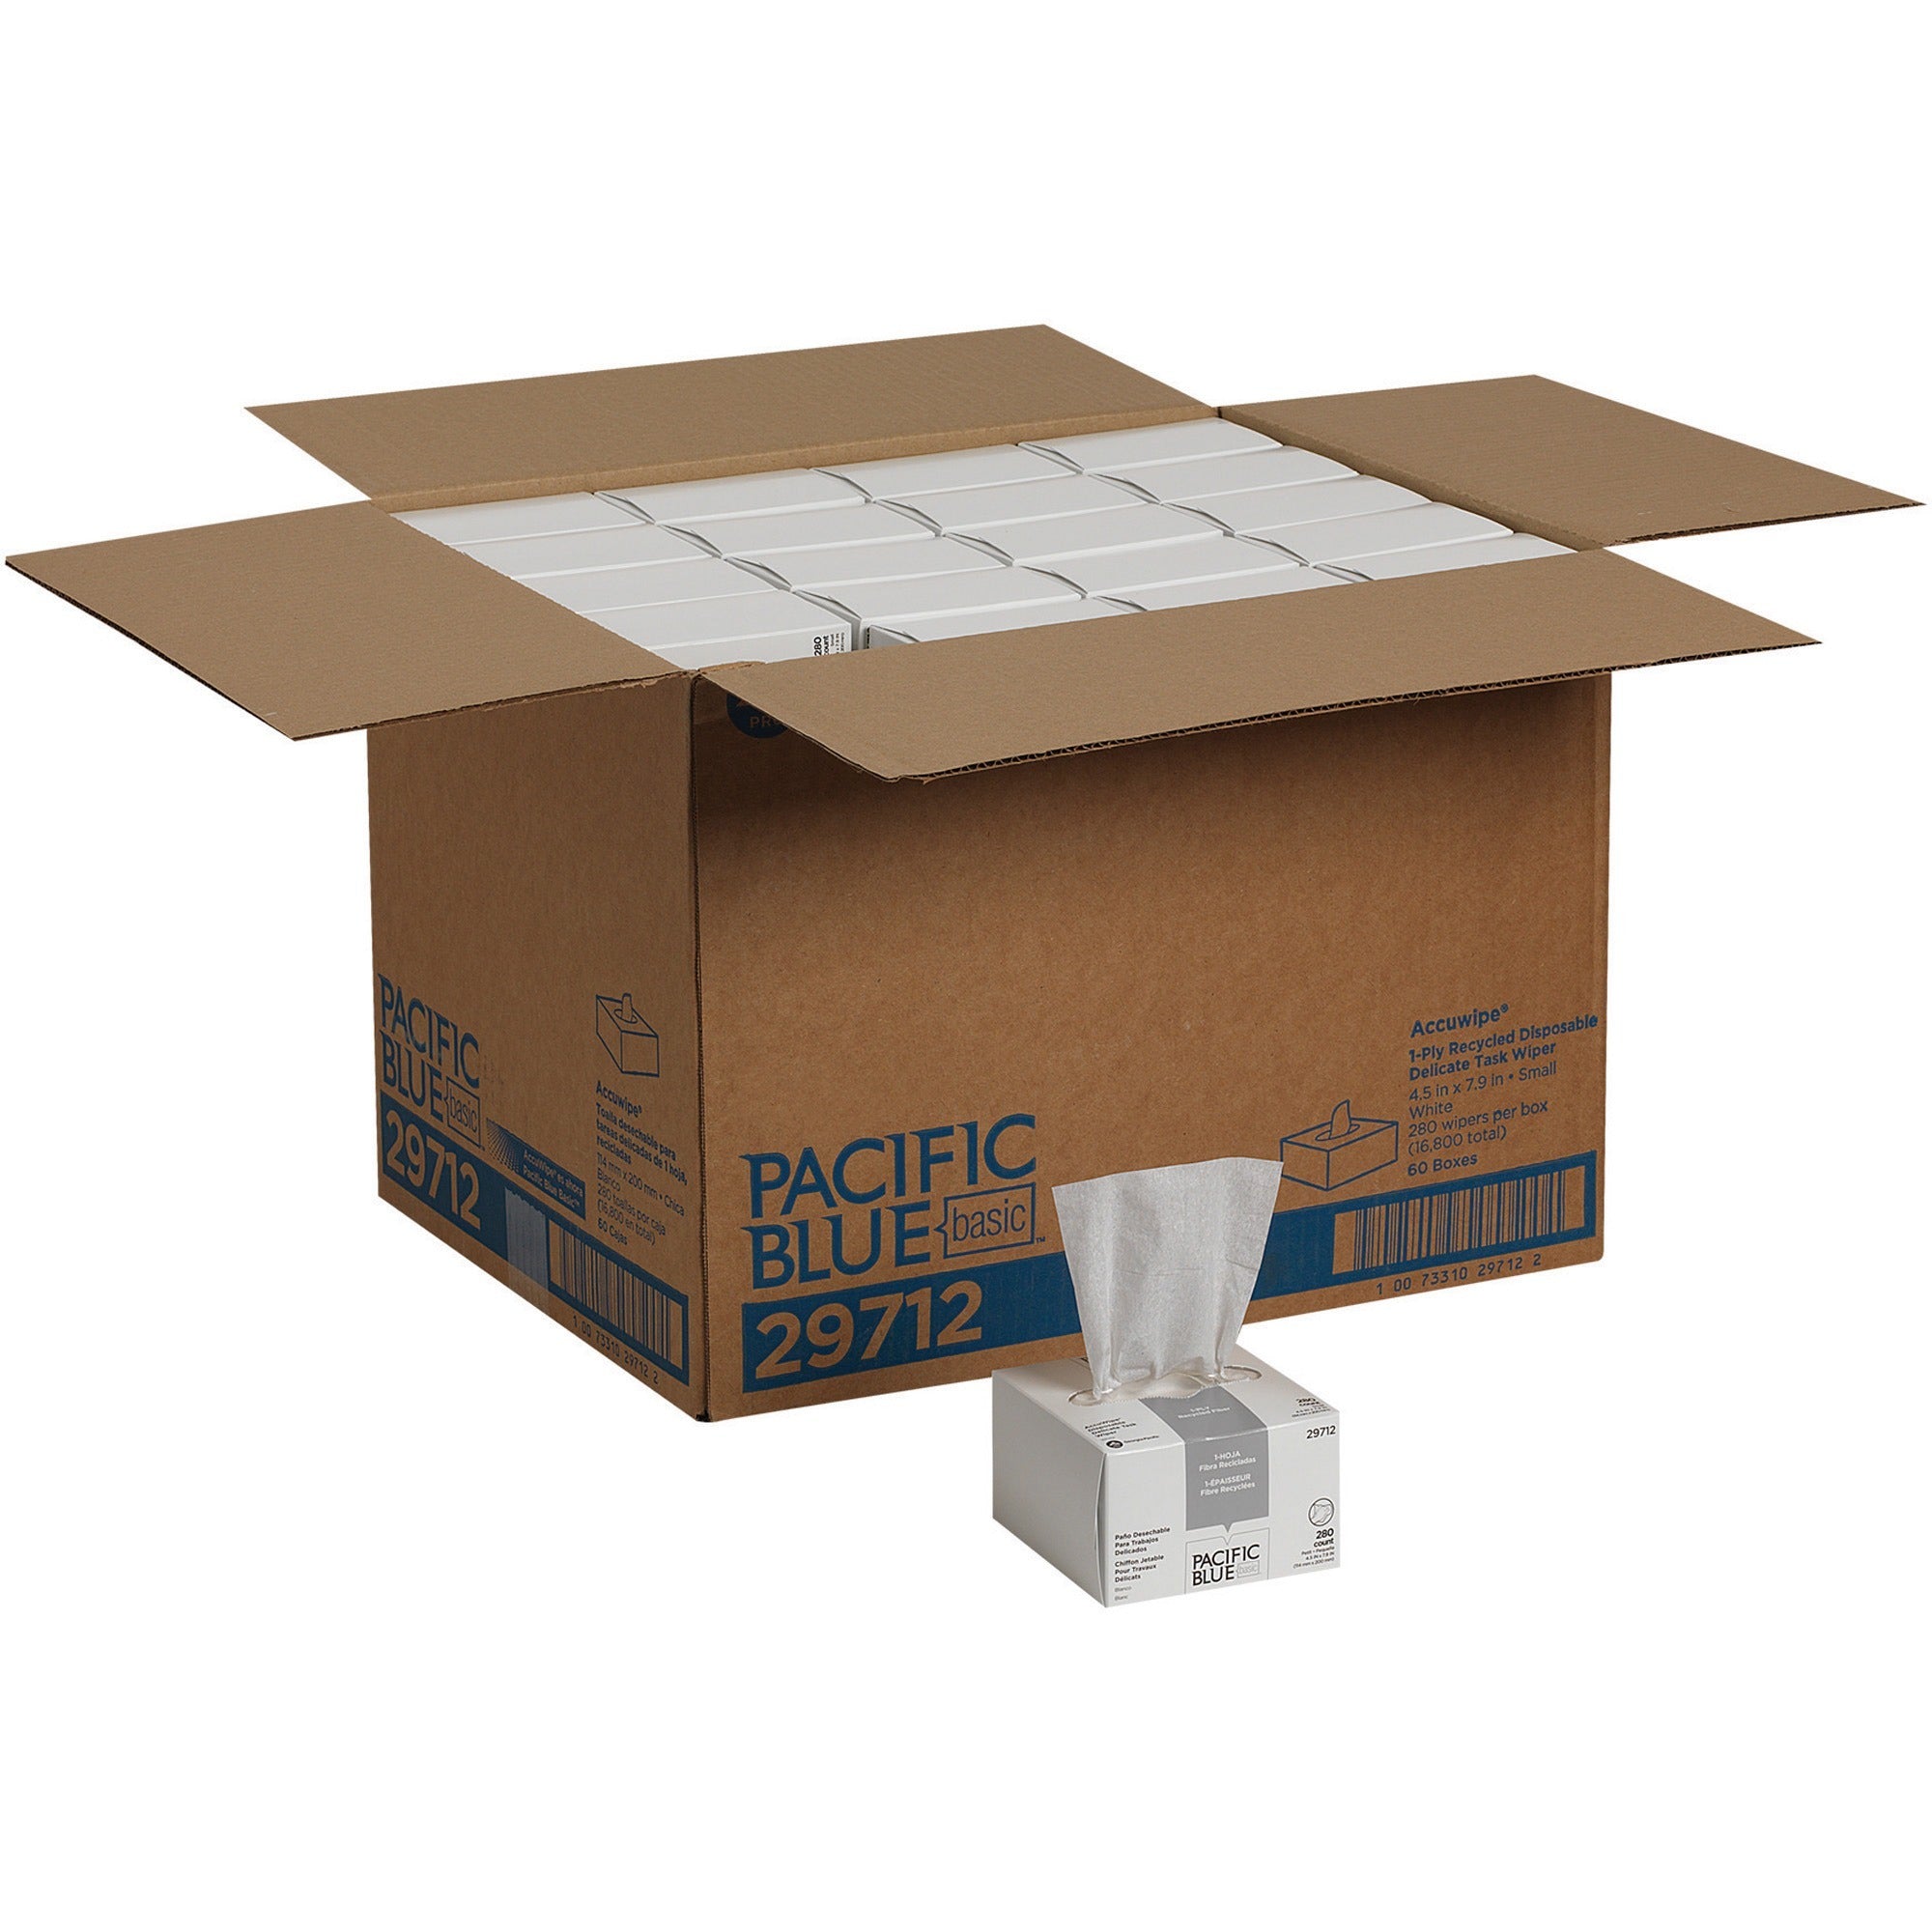 pacific-blue-basic-accuwipe-recycled-disposable-delicate-task-wipers-for-precision-part-instrument-lens-absorbent-soft-non-abrasive-disposable-streak-free-fiber-280-box-60-carton-white_gpc29712ct - 1